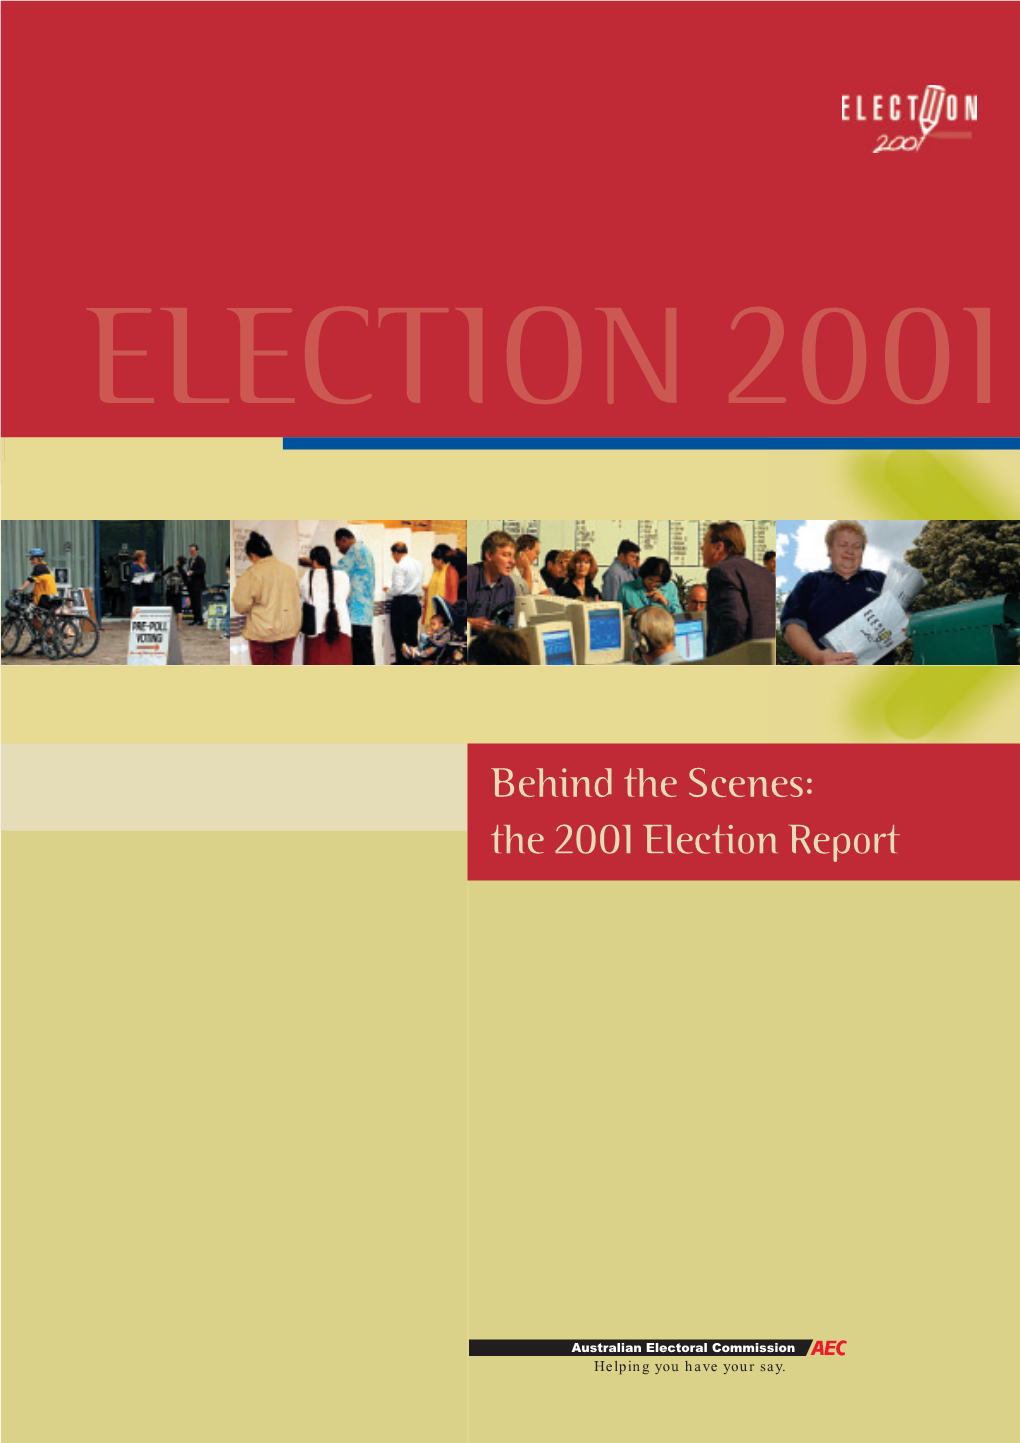 Behind the Scenes: the 2001 Election Report